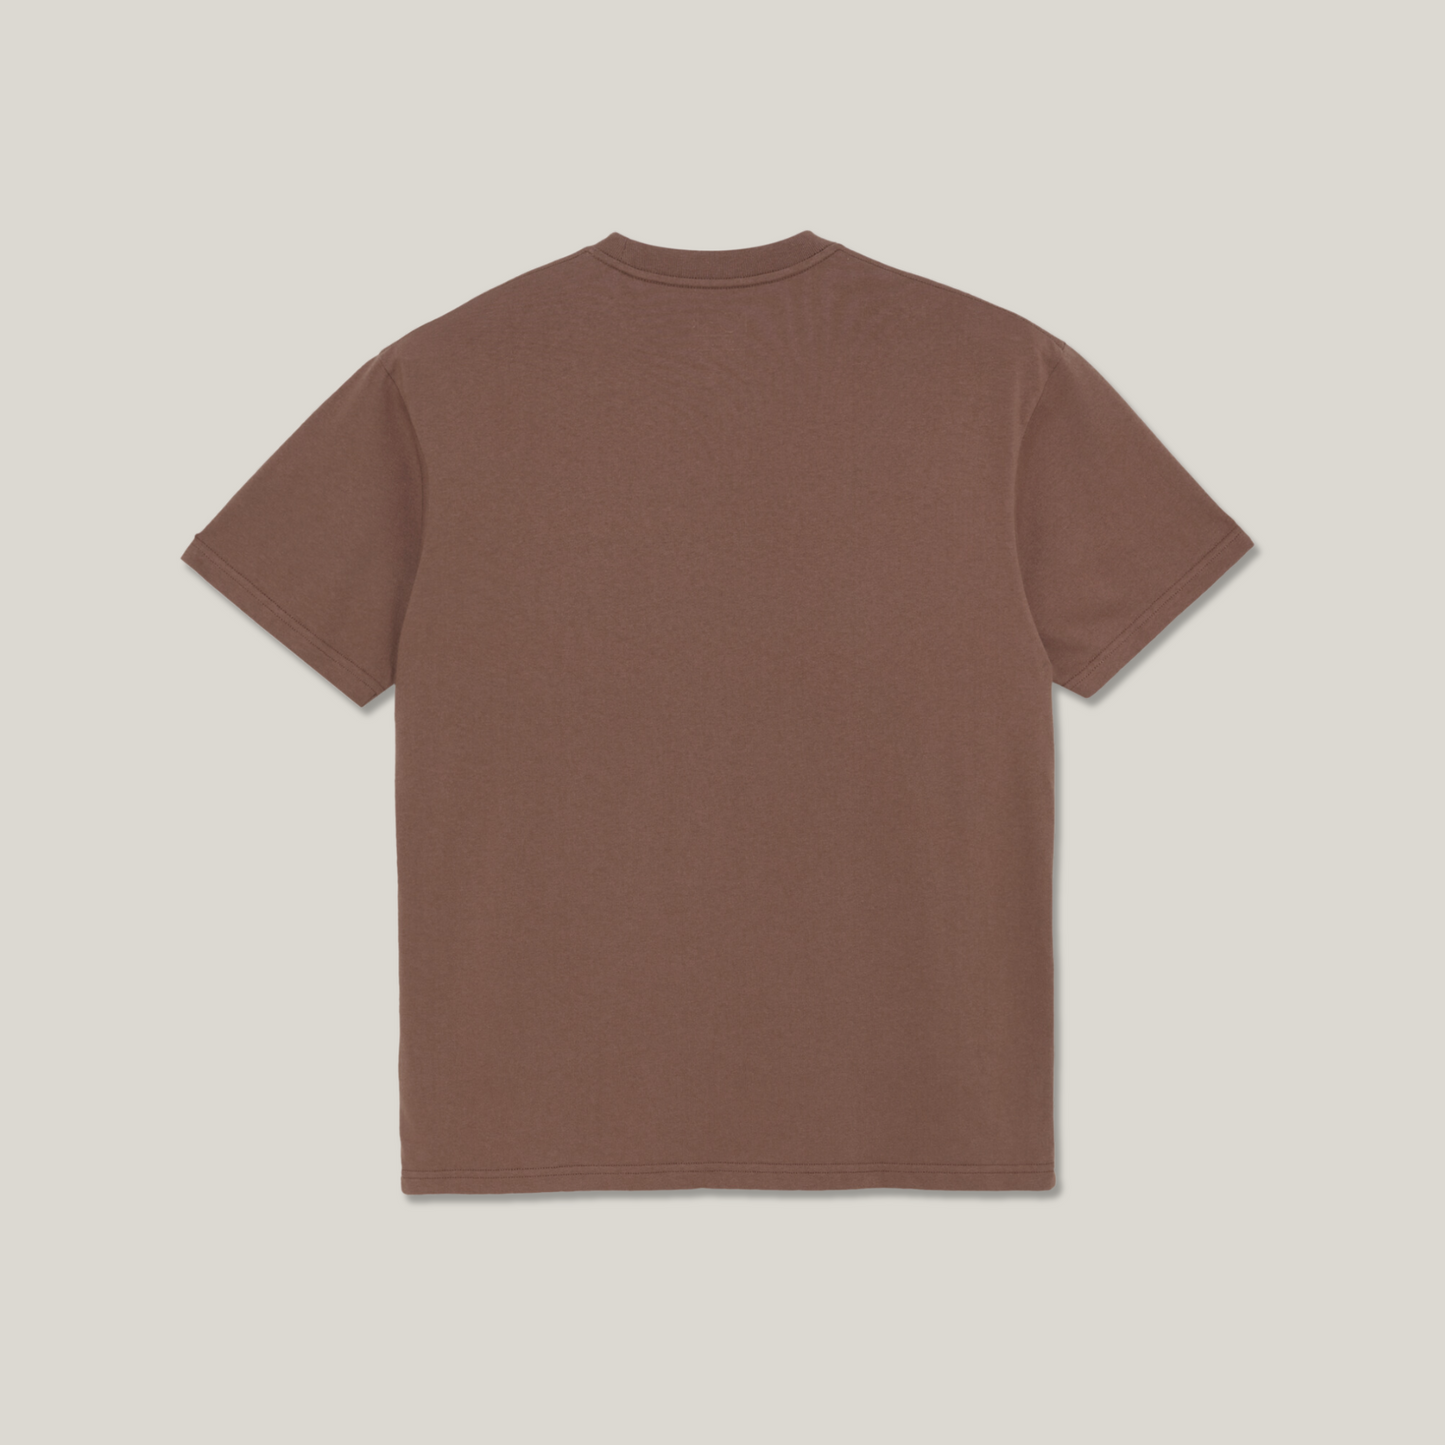 Load image into Gallery viewer, Polar - Pocket tee - Rust
